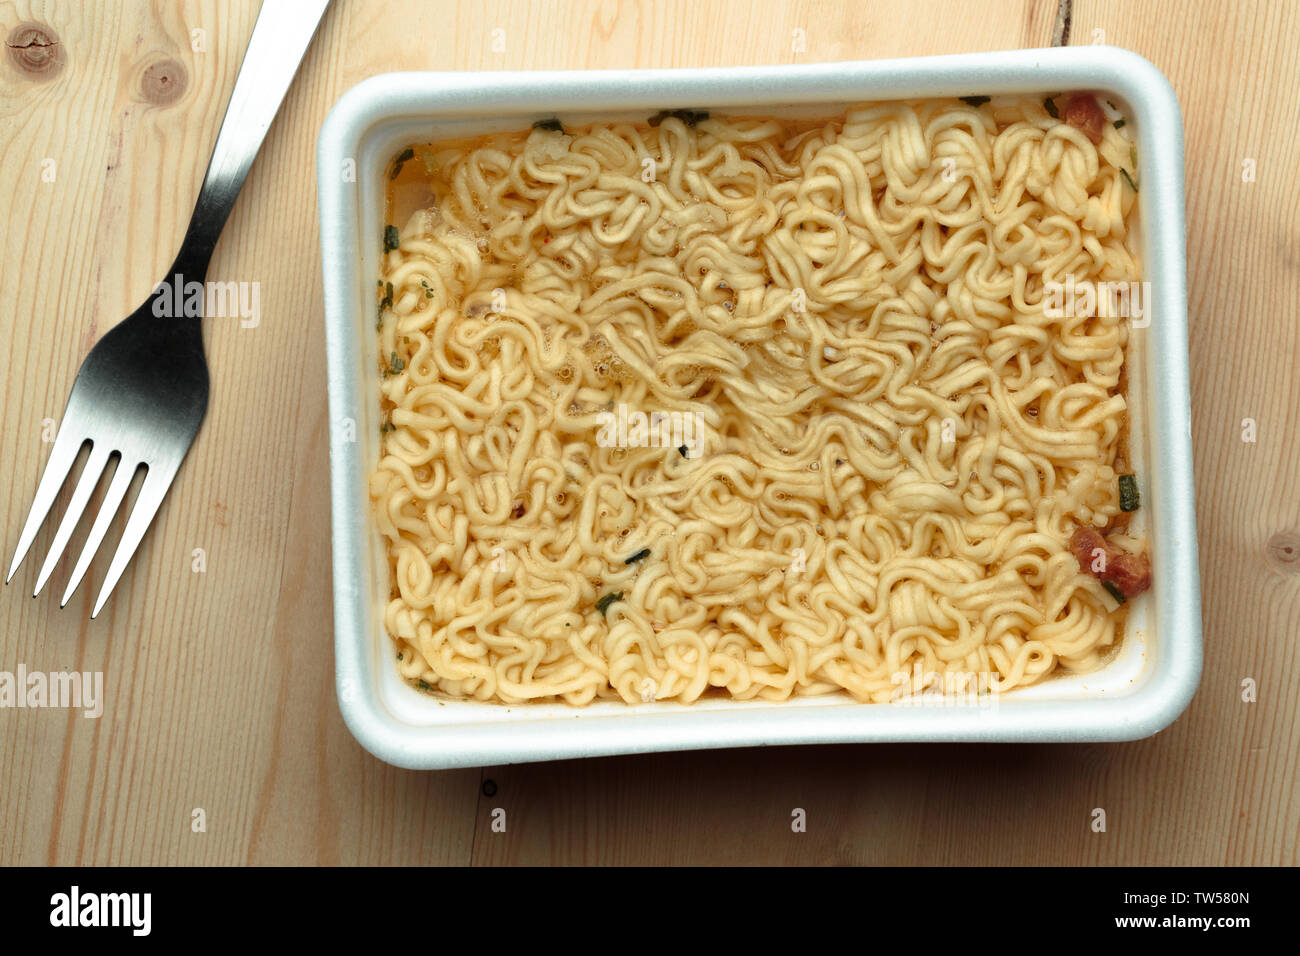 Nourishing noodles on a wooden table in a disposable plate. Stock Photo